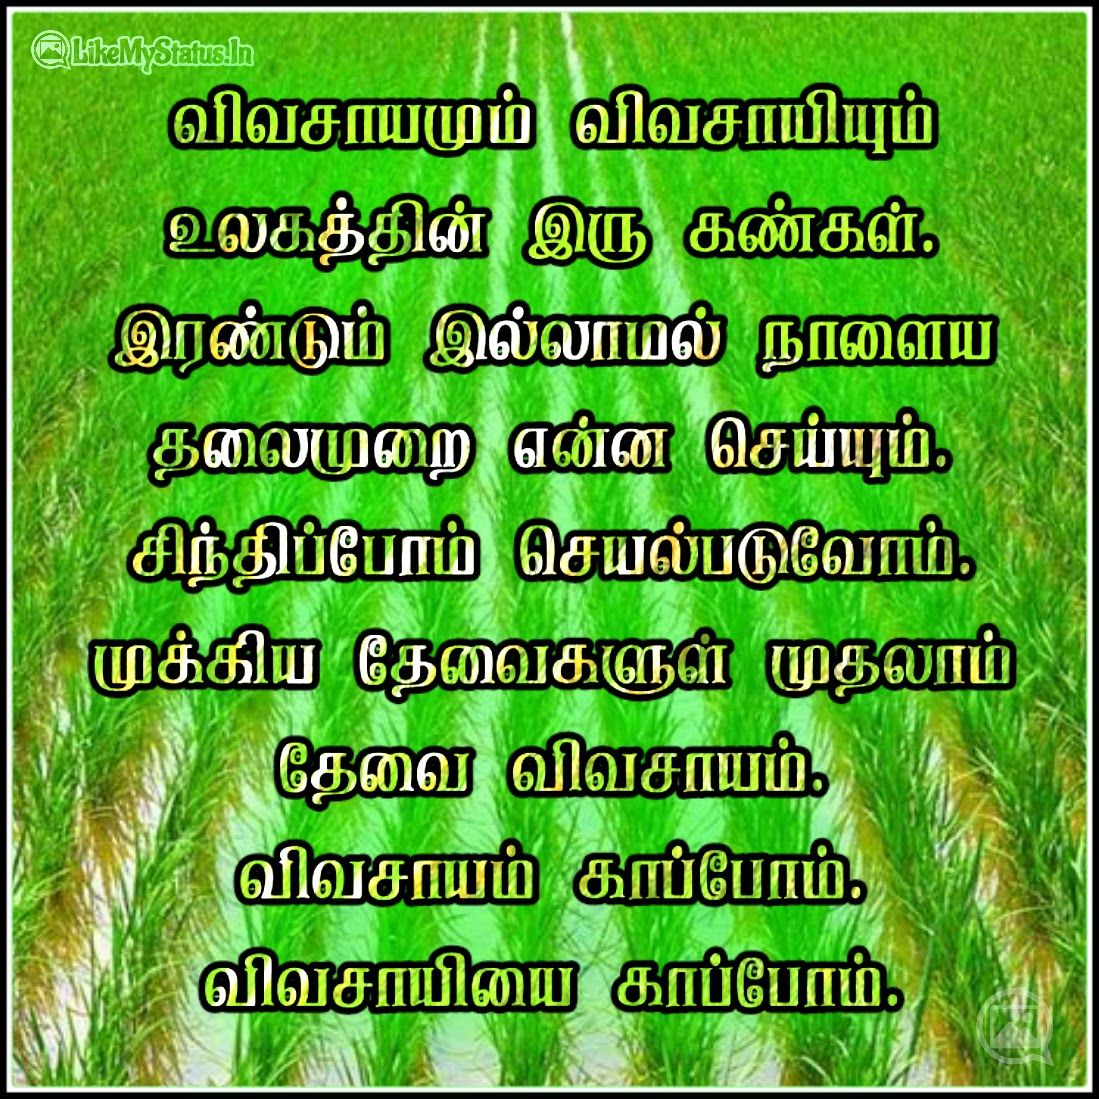 I kindly request to our GOVERNMENTS  to stop farmer land acquisitions in NLC  CUDDALORE, #savefarmers #savefarming @CMOTamilnadu @PMOIndia